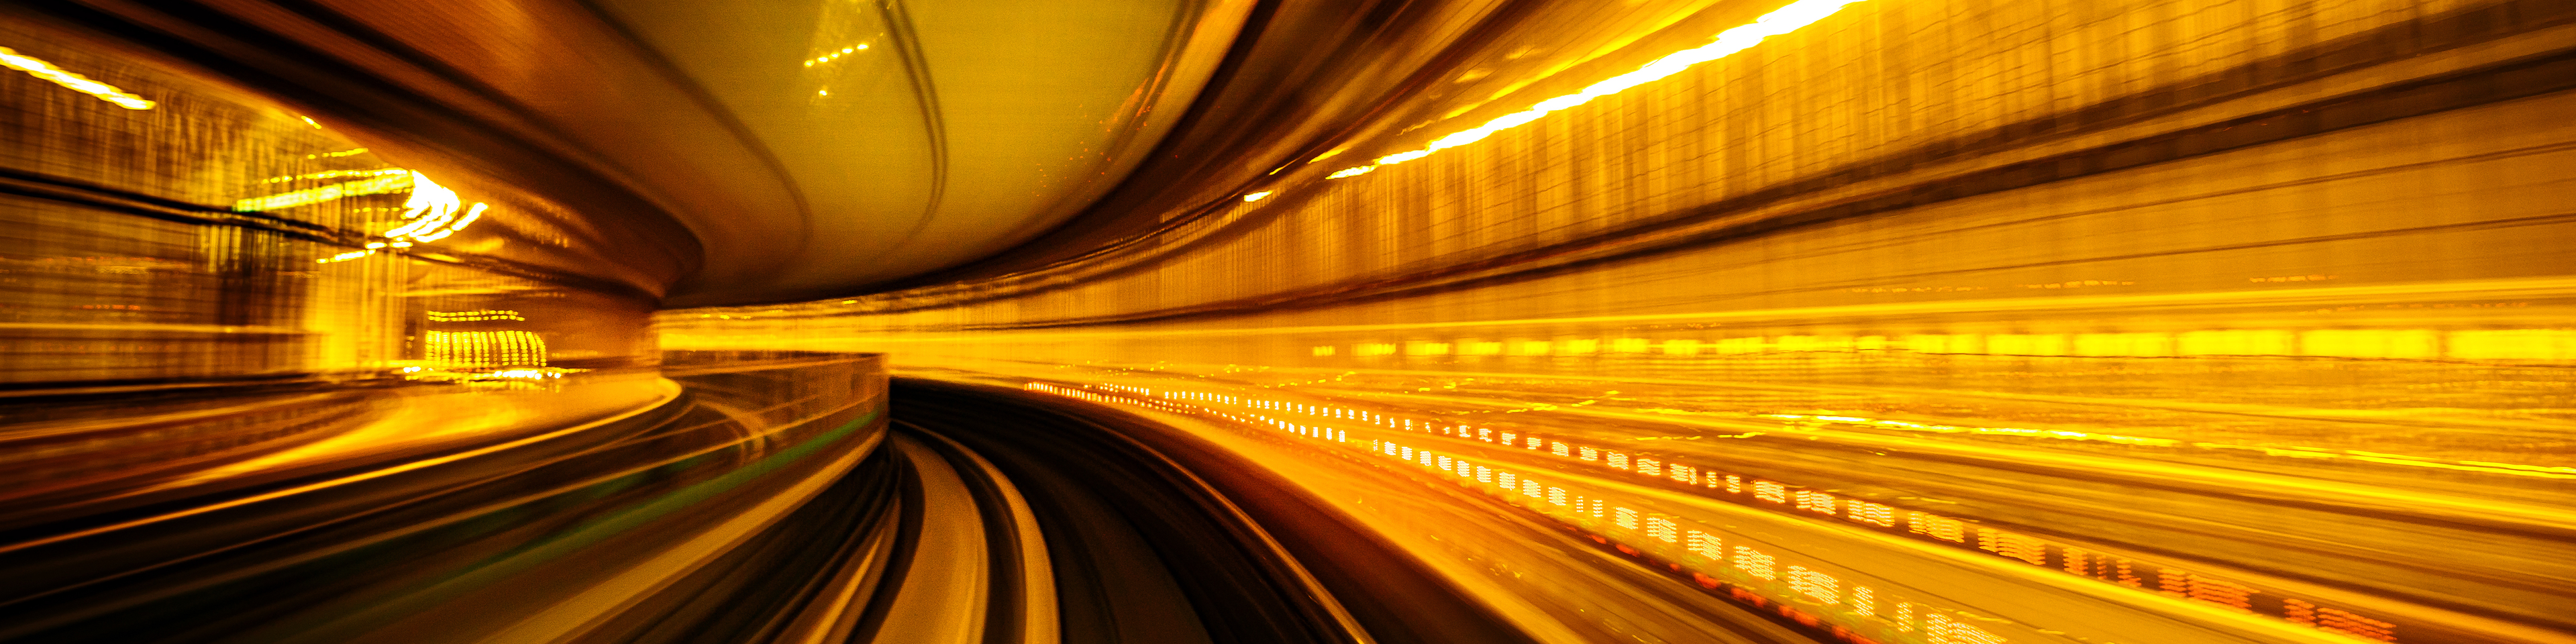 Abstract motion-blurred view from a moving train,